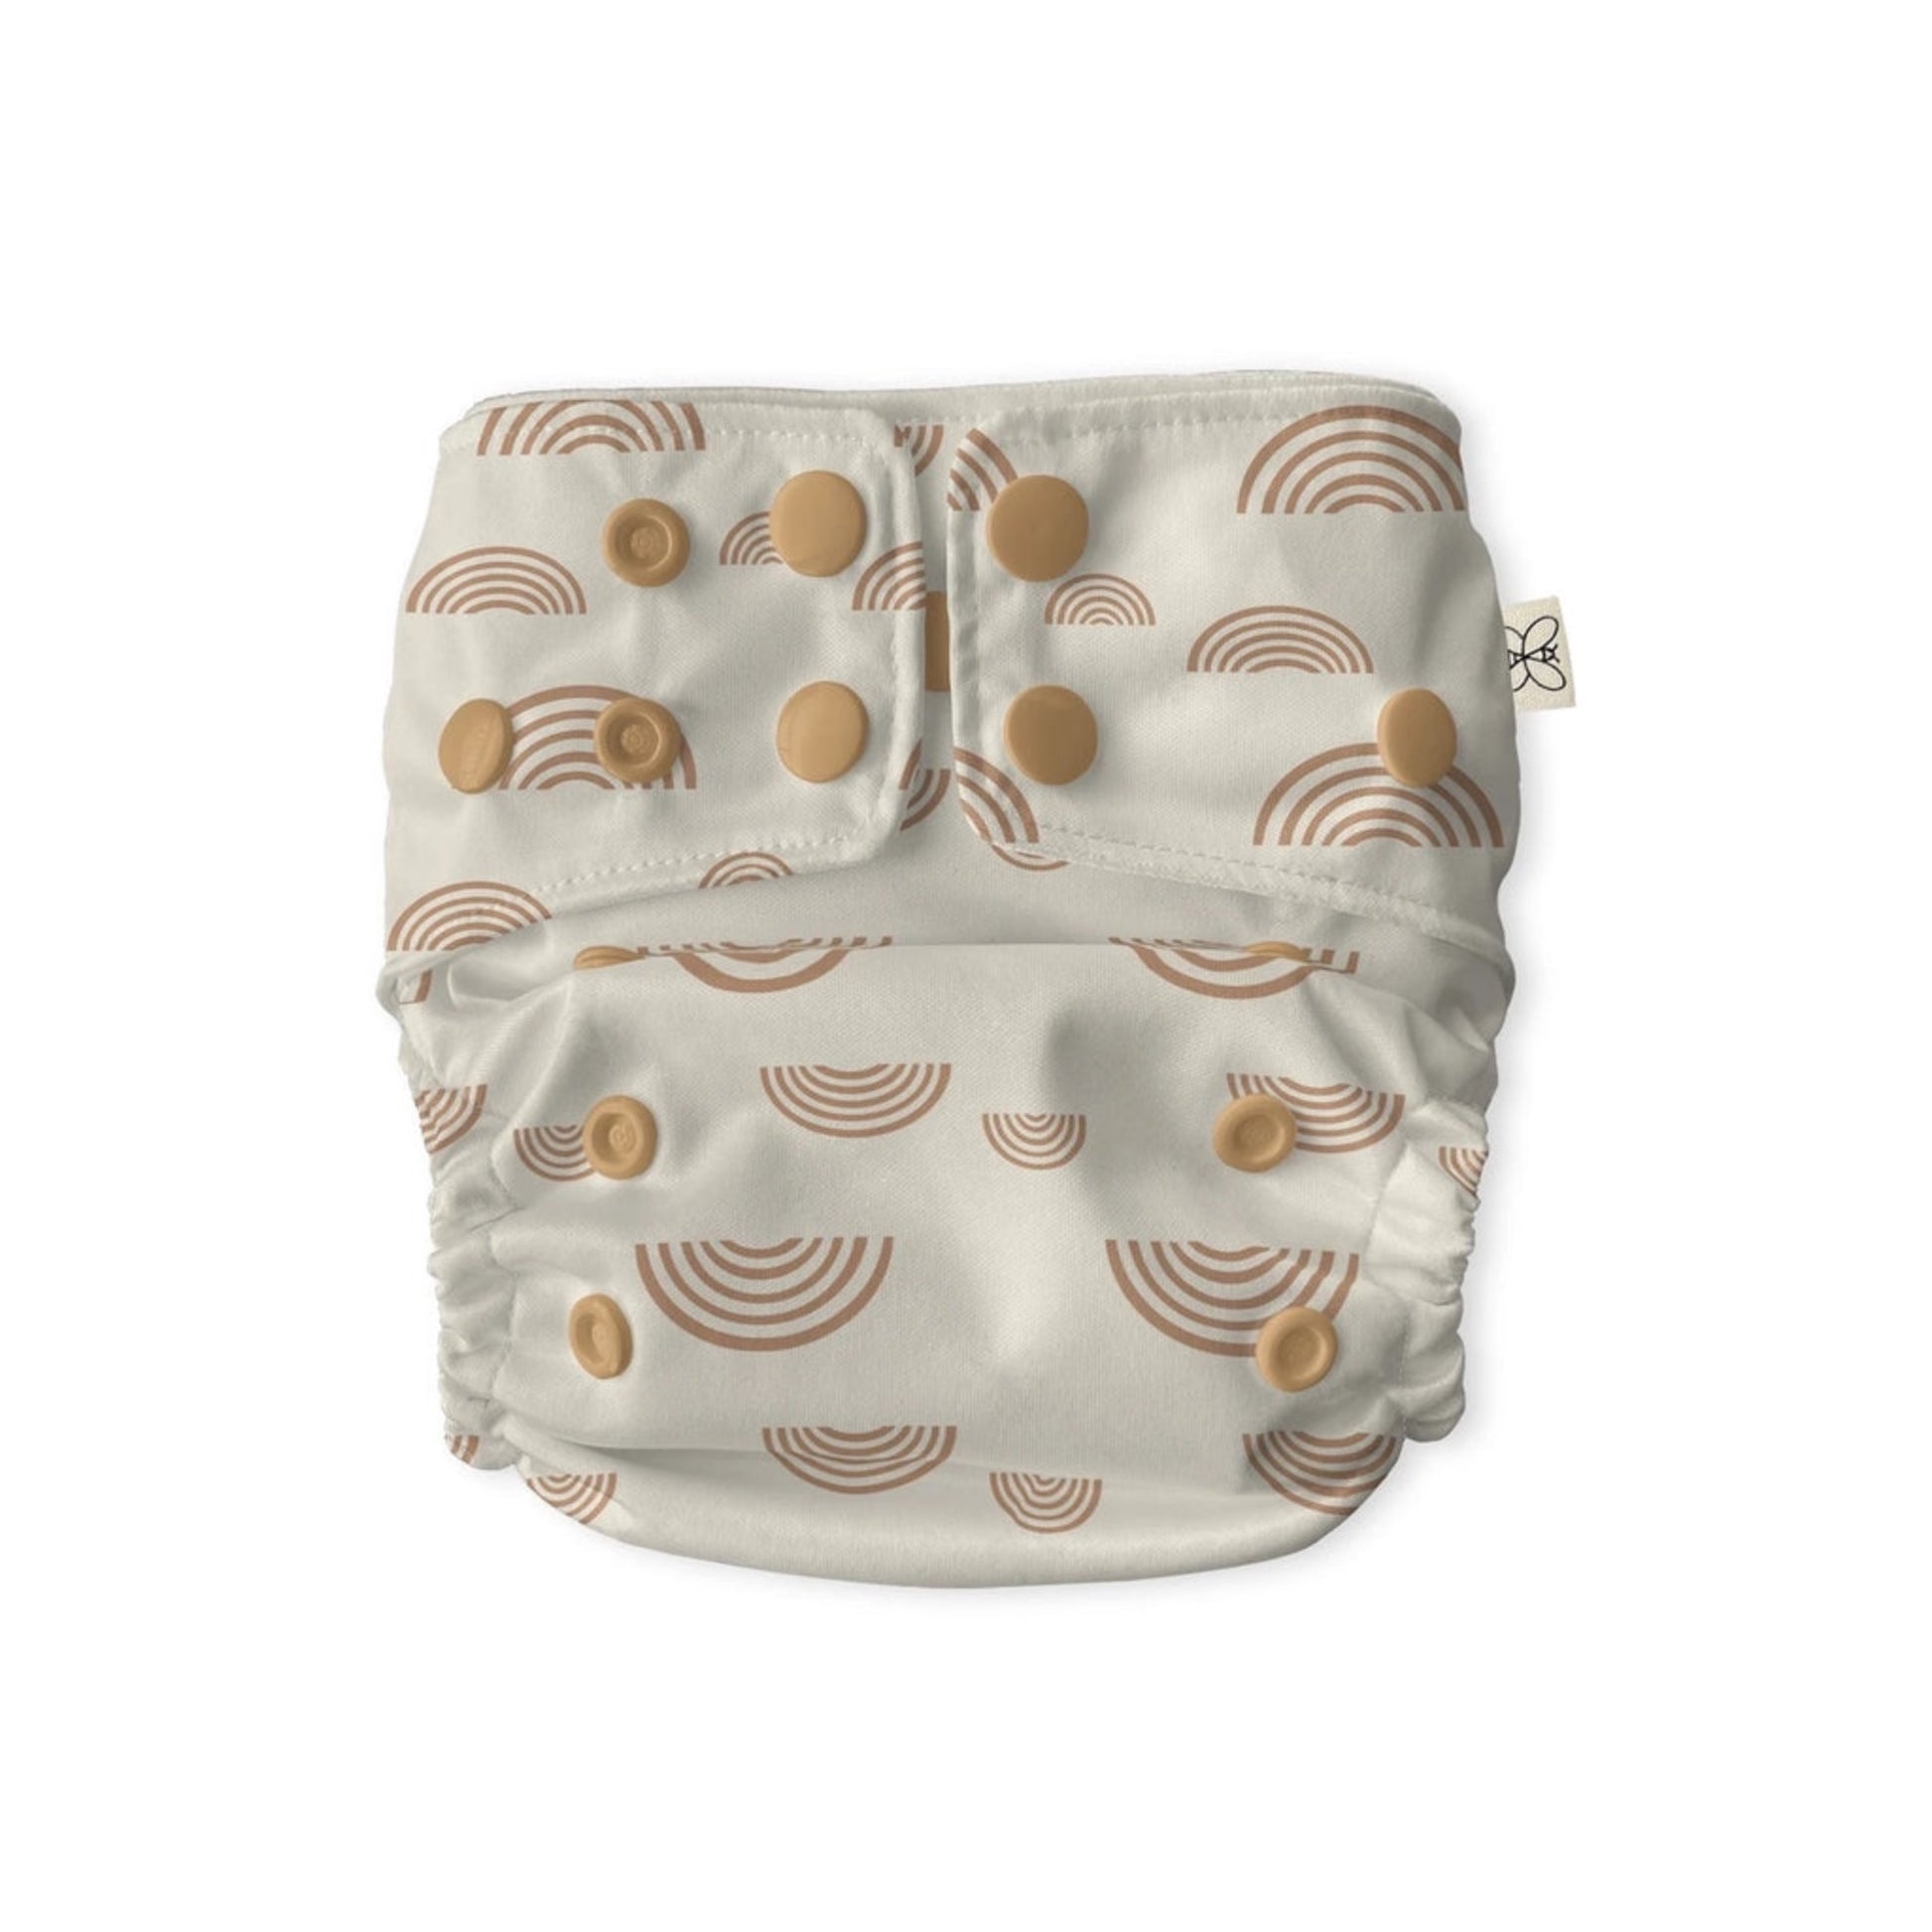 Bebe Hive Snap in Pocket Nappy-Snap in with Pocket-The Bebe Hive-Butterscotch Dream-The Nappy Market